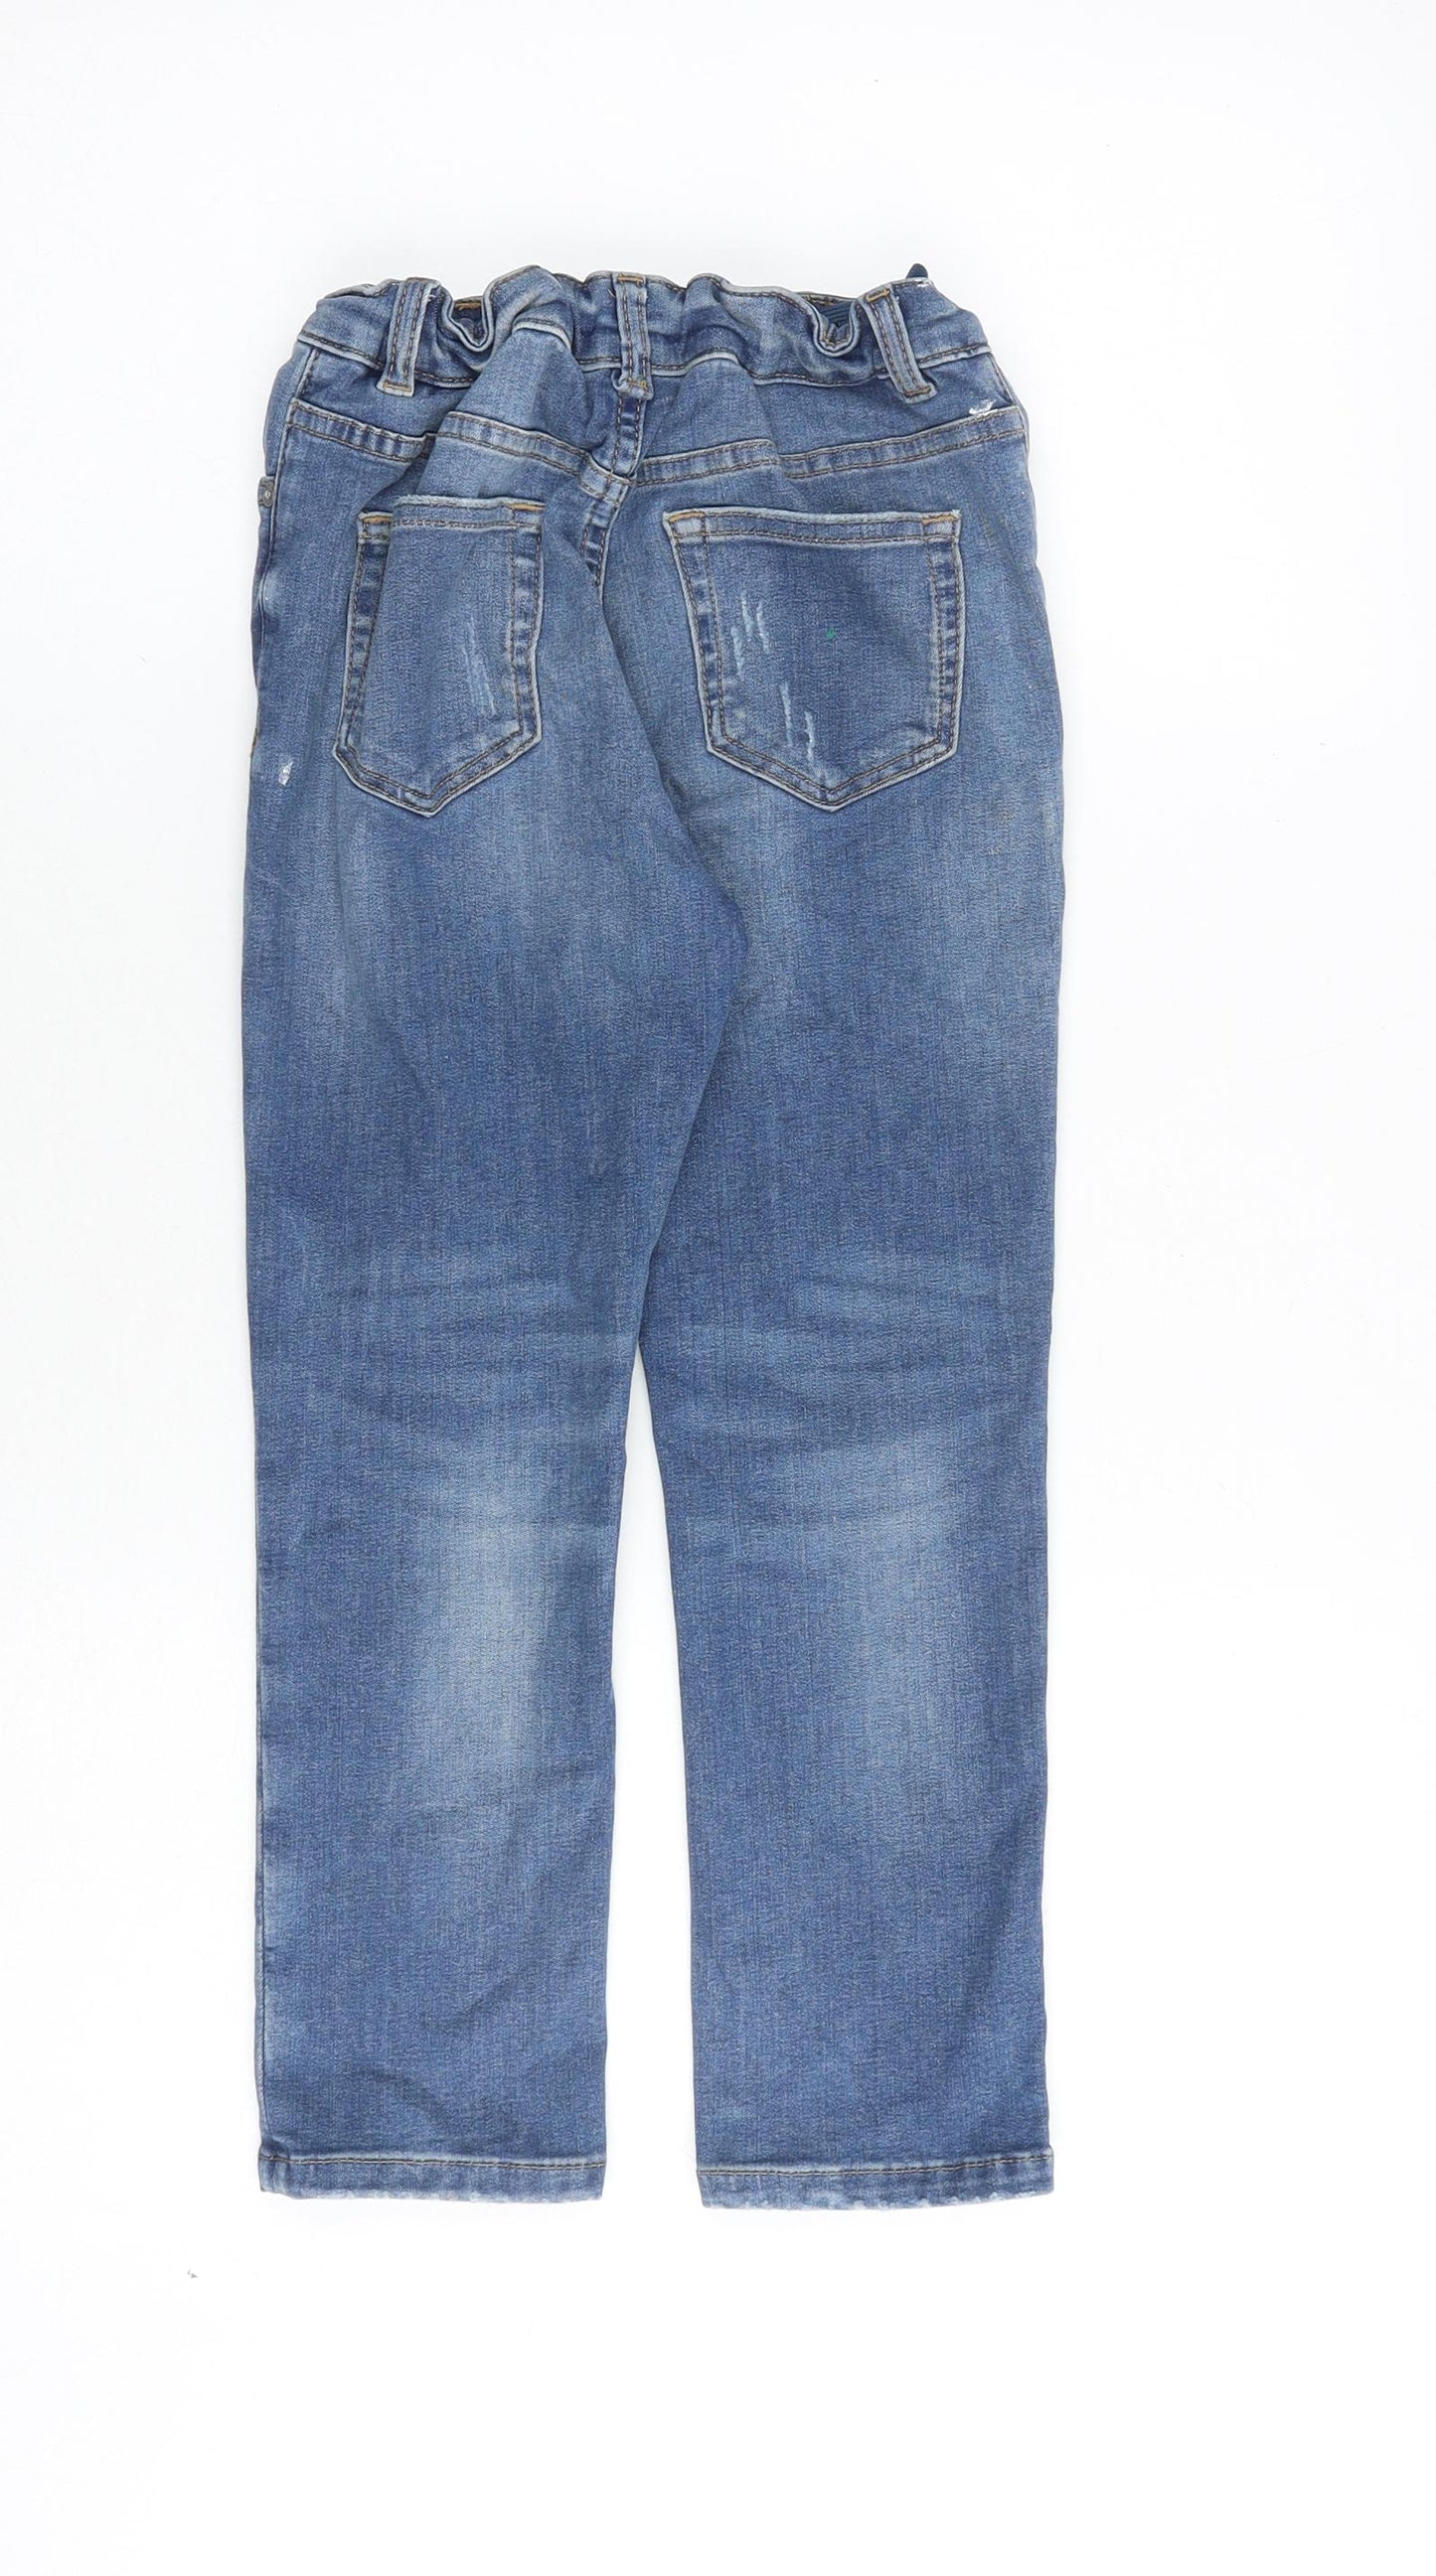 Marks and Spencer Boys Blue Cotton Straight Jeans Size 7-8 Years Regular Zip